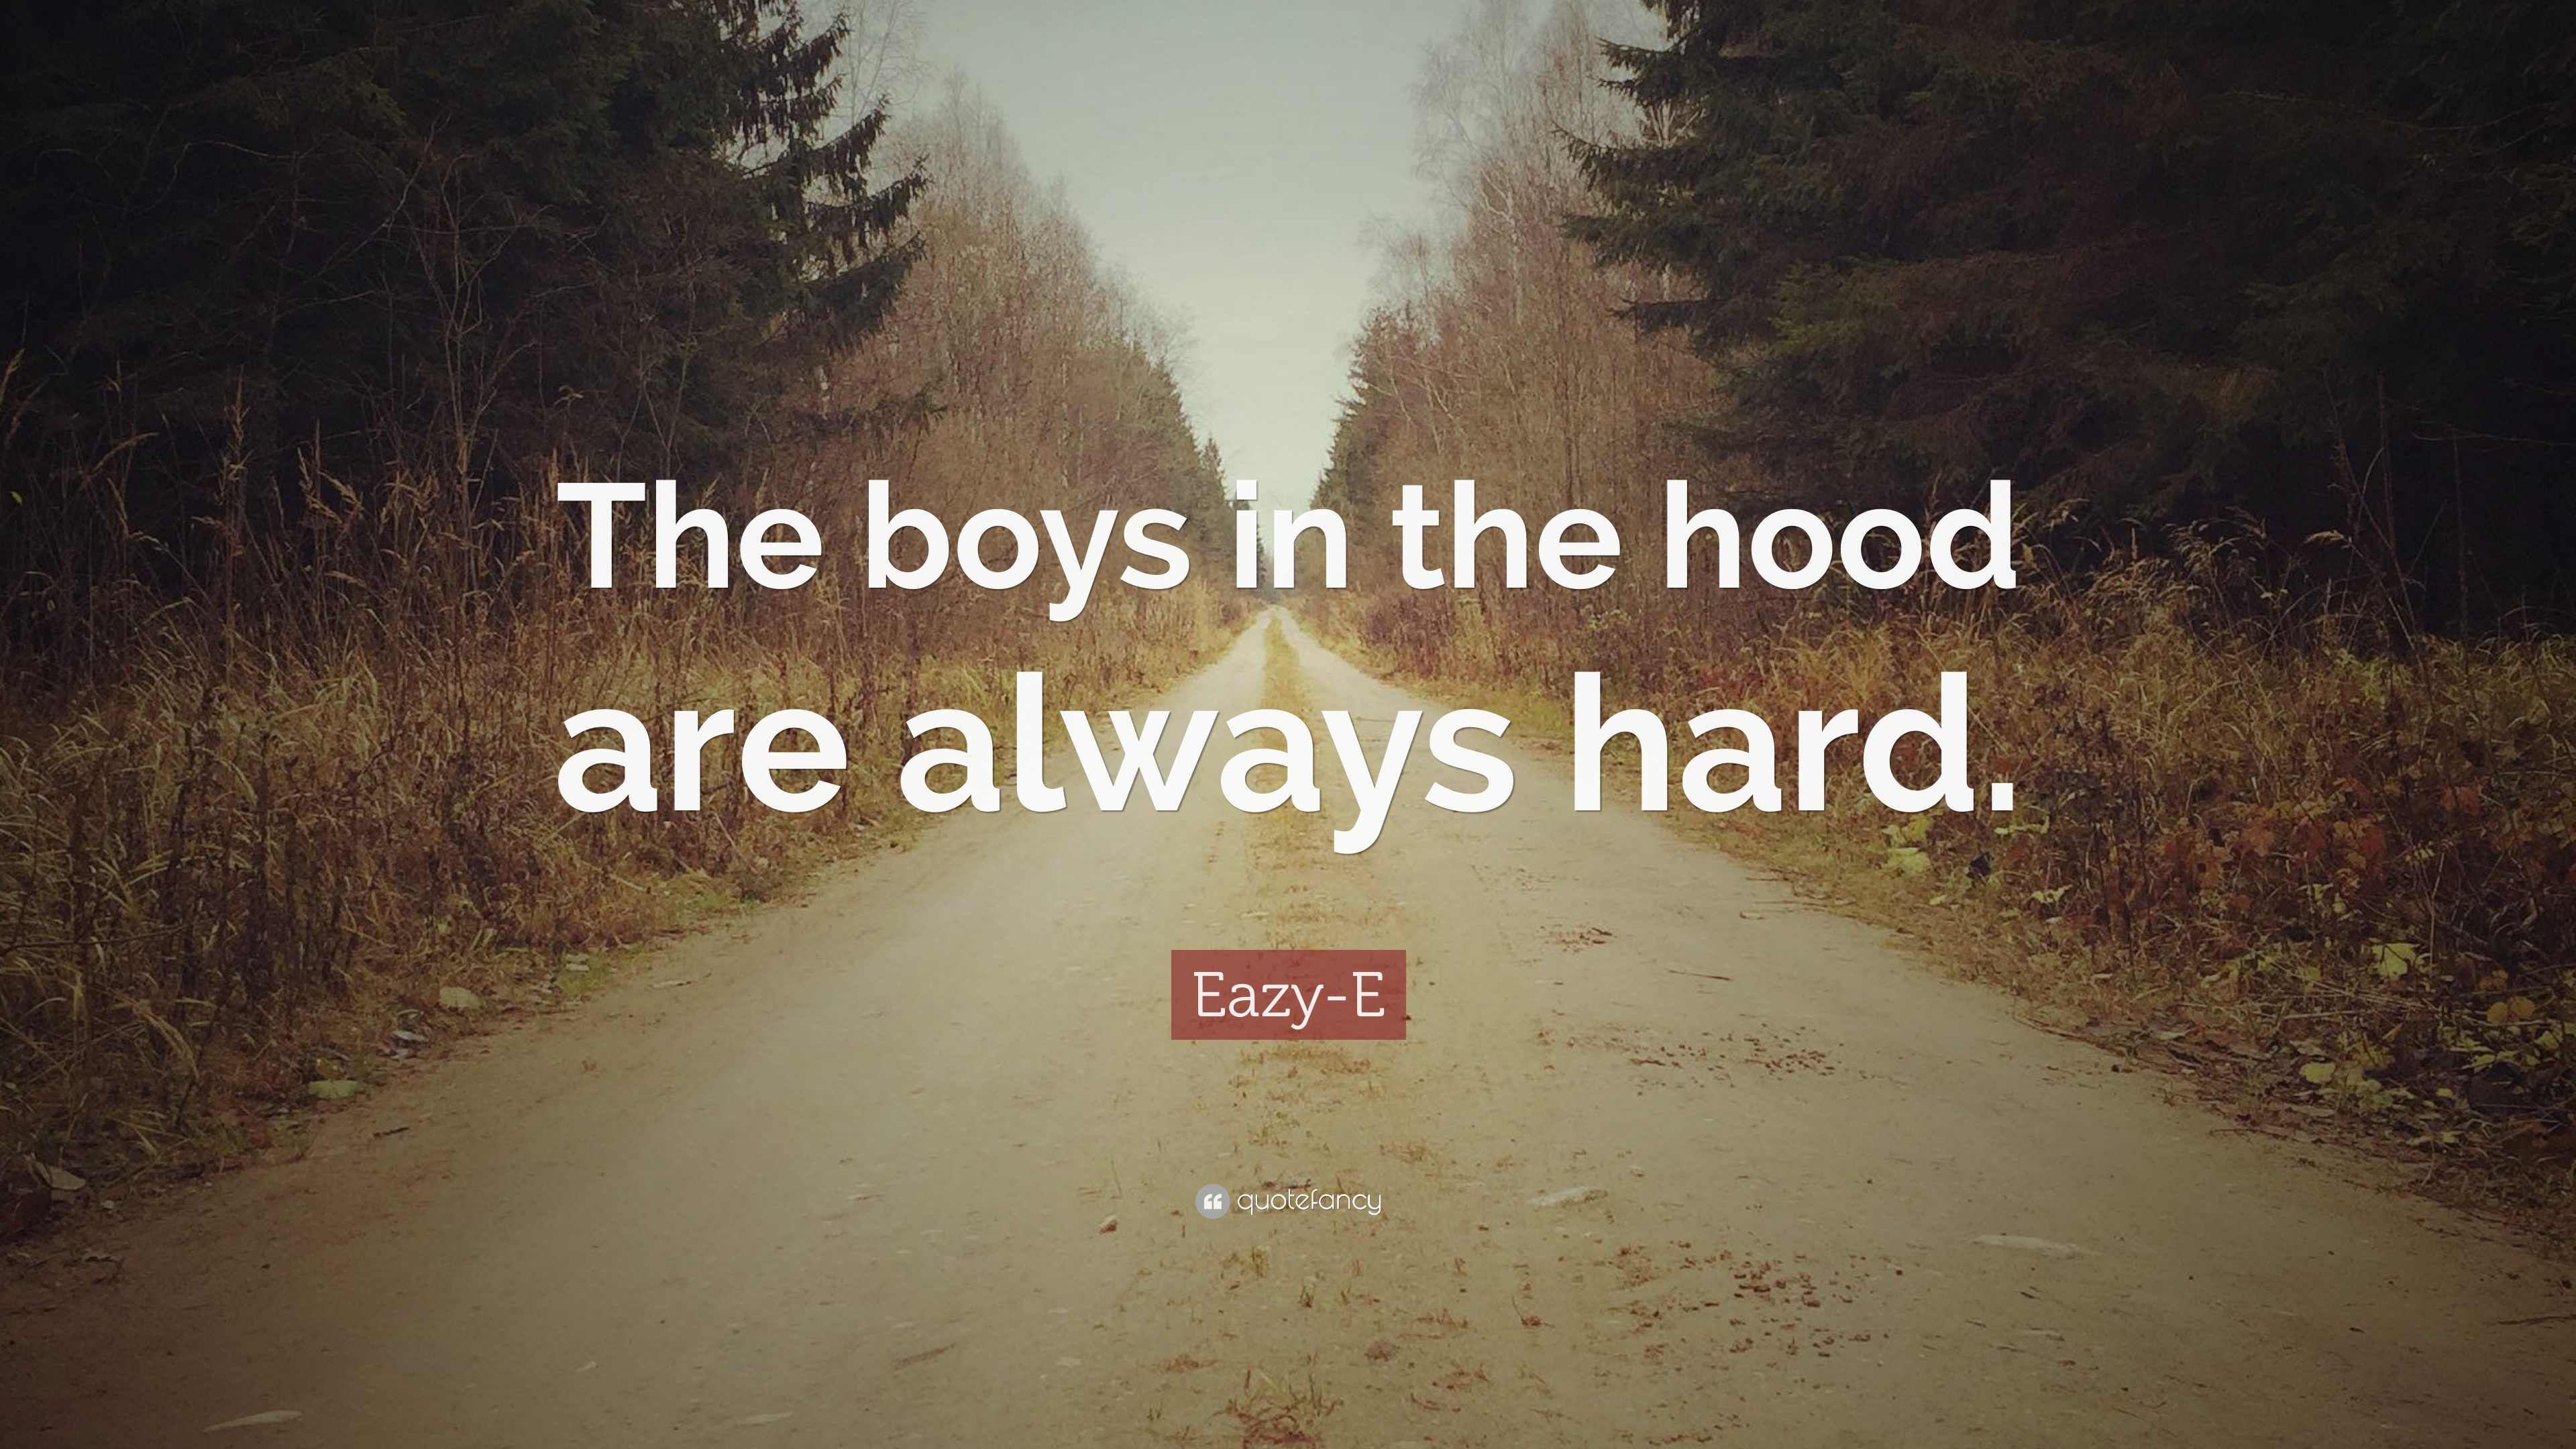 7 Quotes About Eazy-E